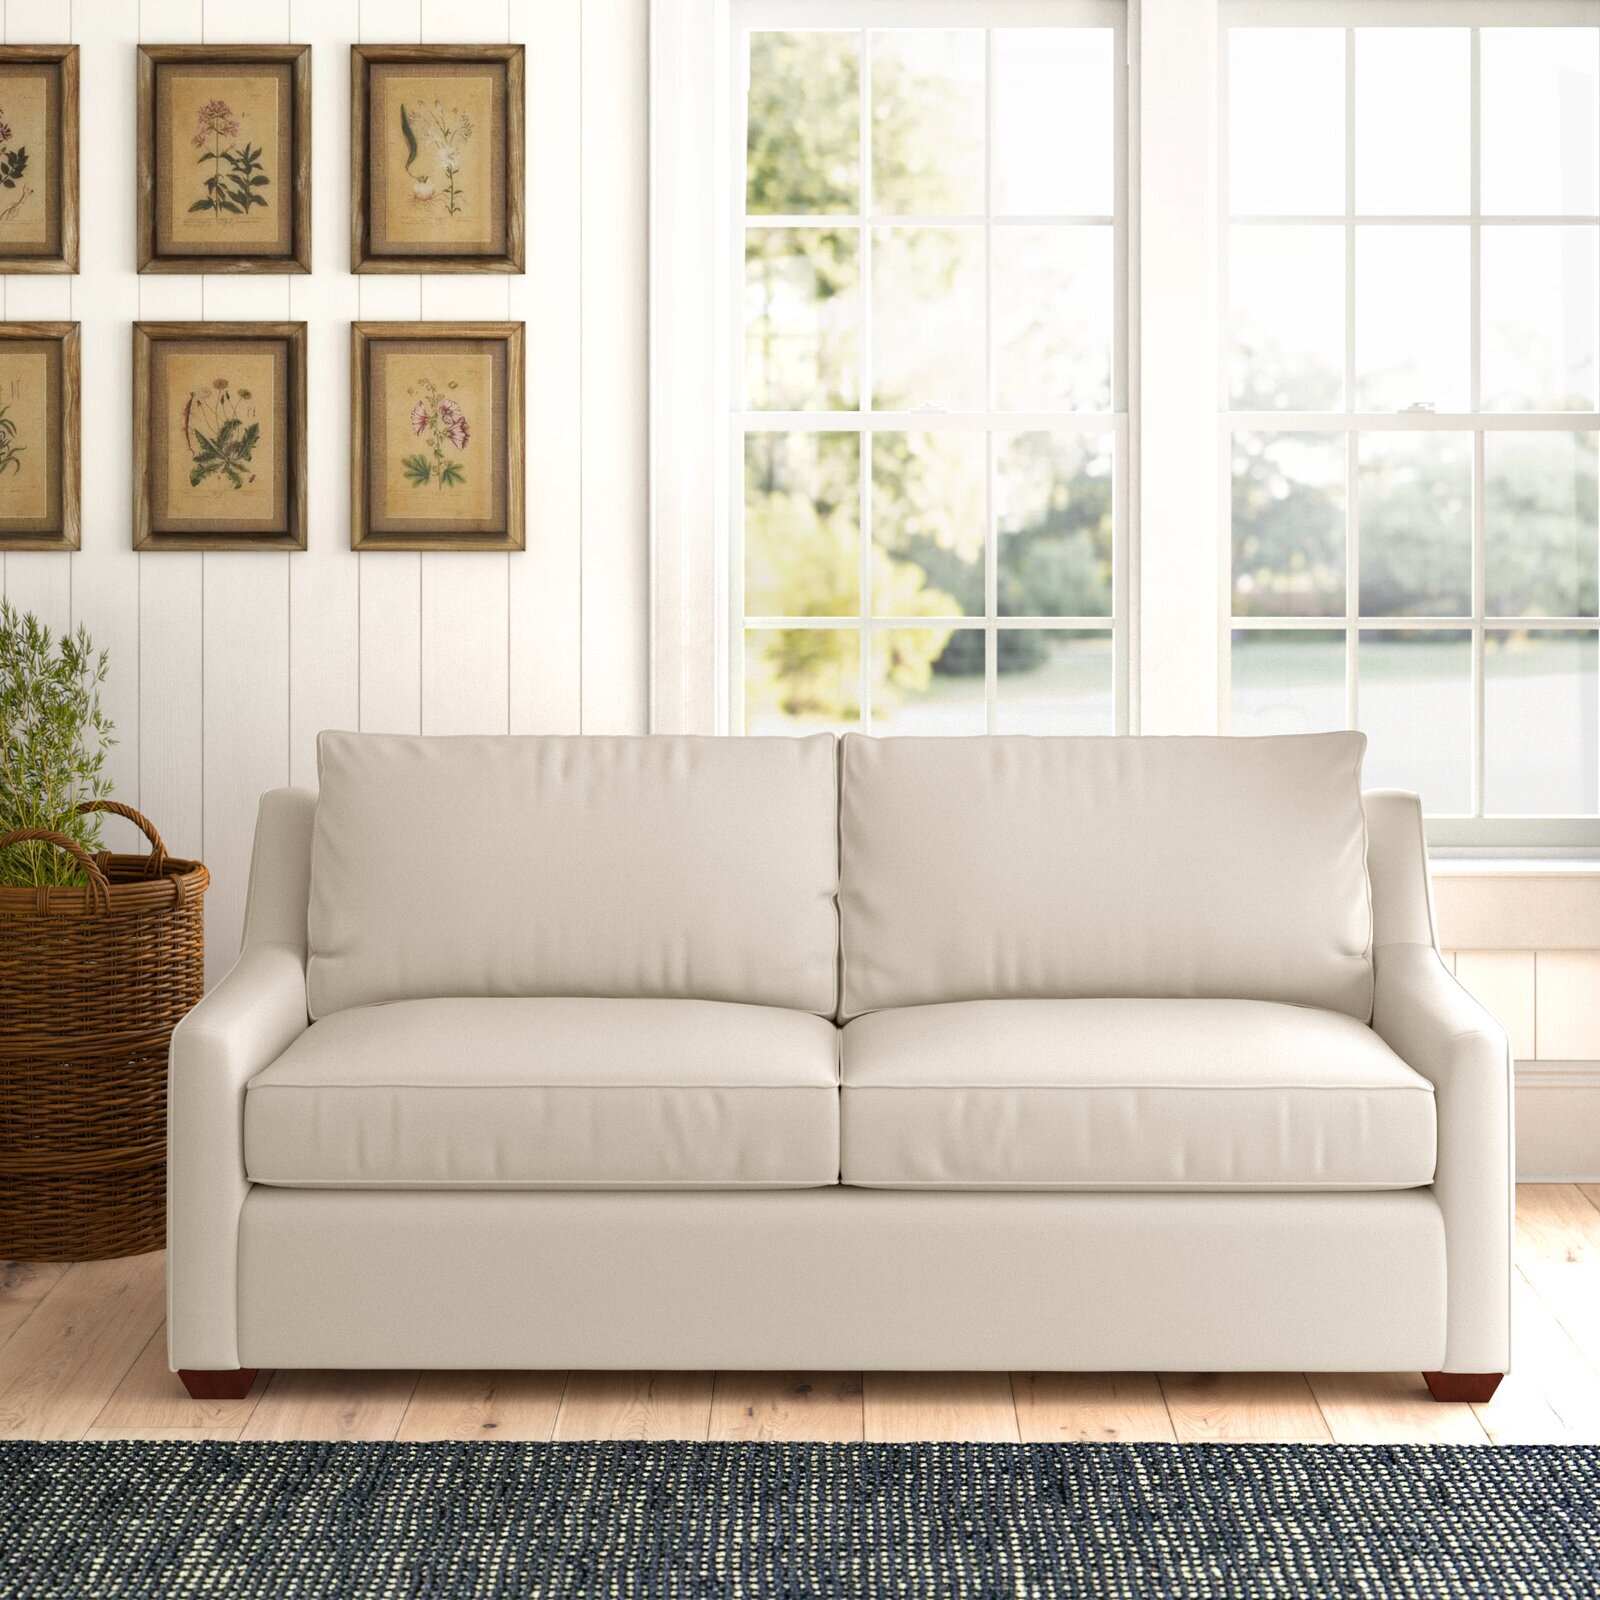 Swifton 72” Recessed Arm Sofa Bed